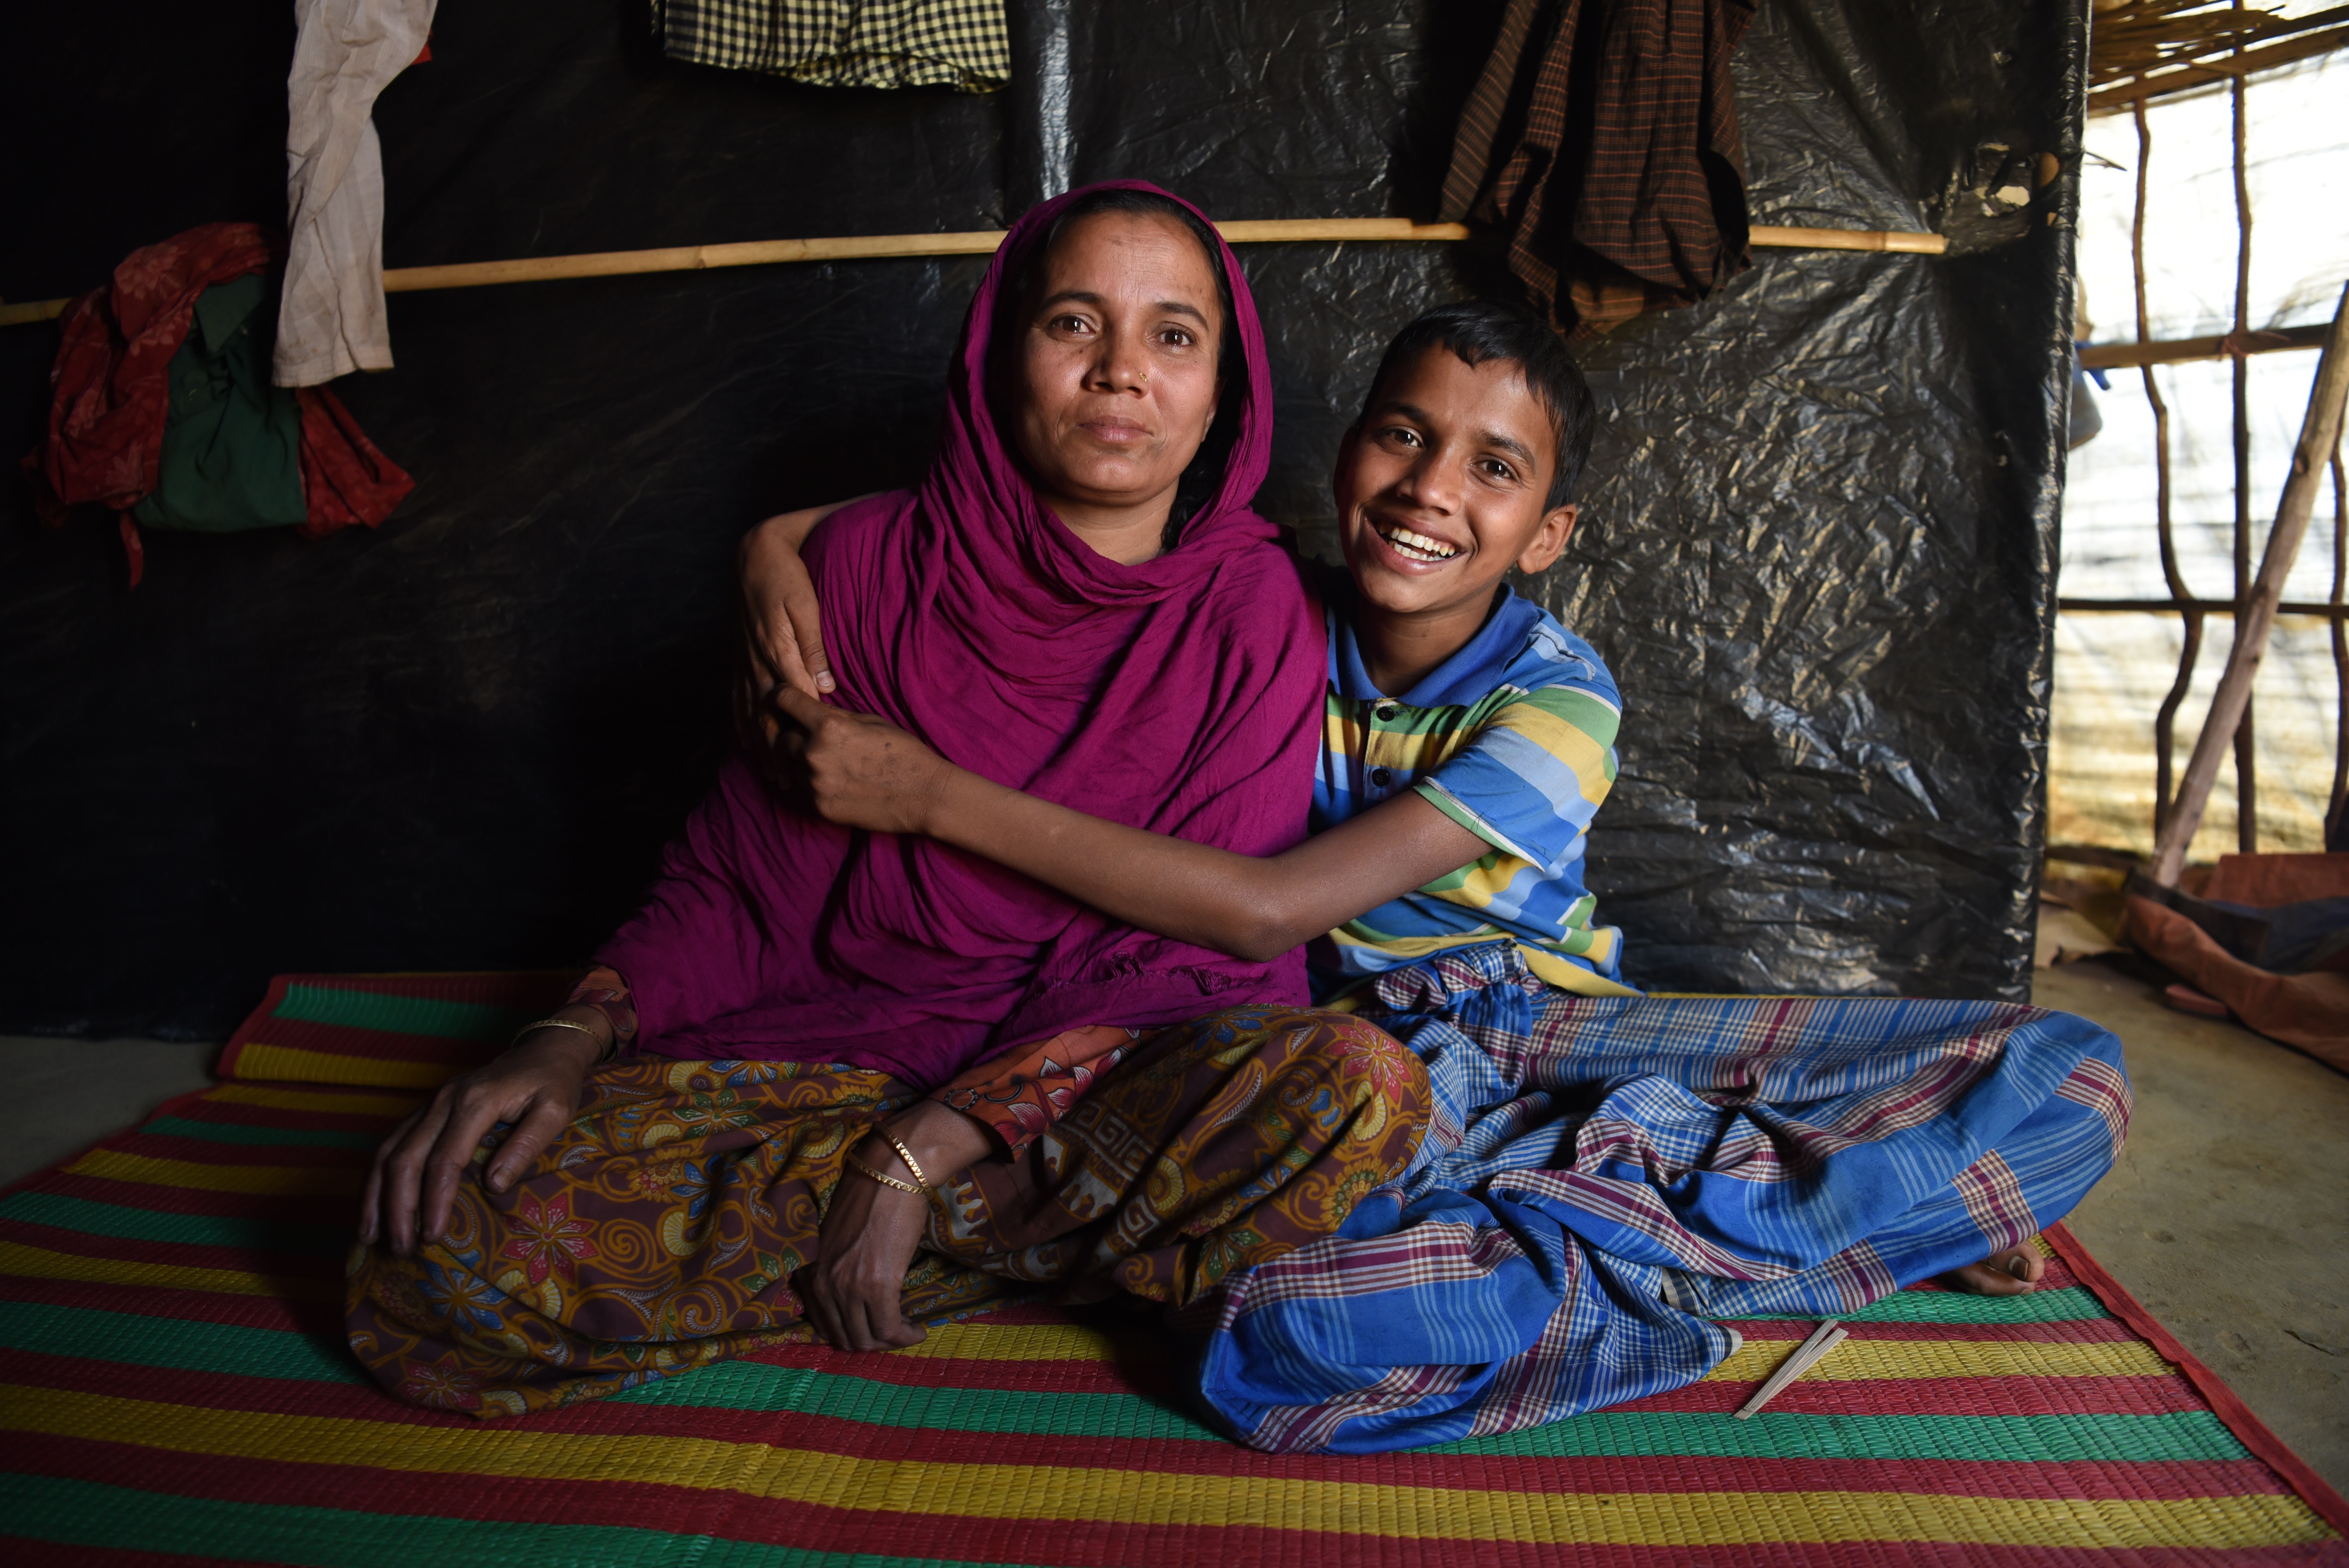 Noorkin and Yacob are Rohingya refugees from Myanmar.